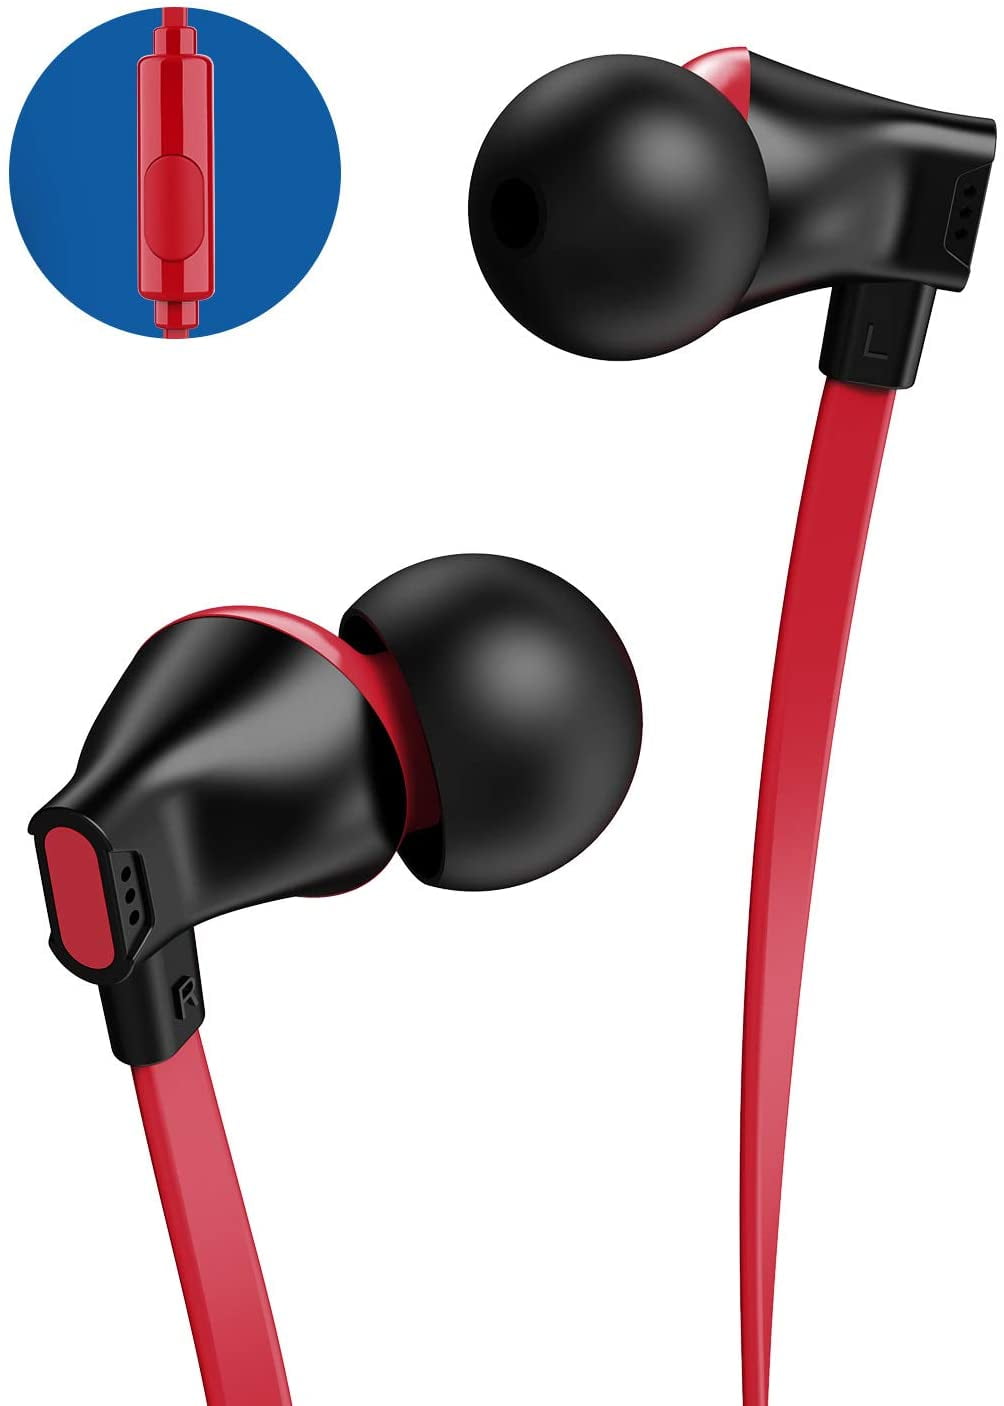 Vogek Tangle-Free 3.5mm In-Ear Earbuds Earphones with Microphone, Noise Isolating for Cellphones, iPod, iPad, Black Red